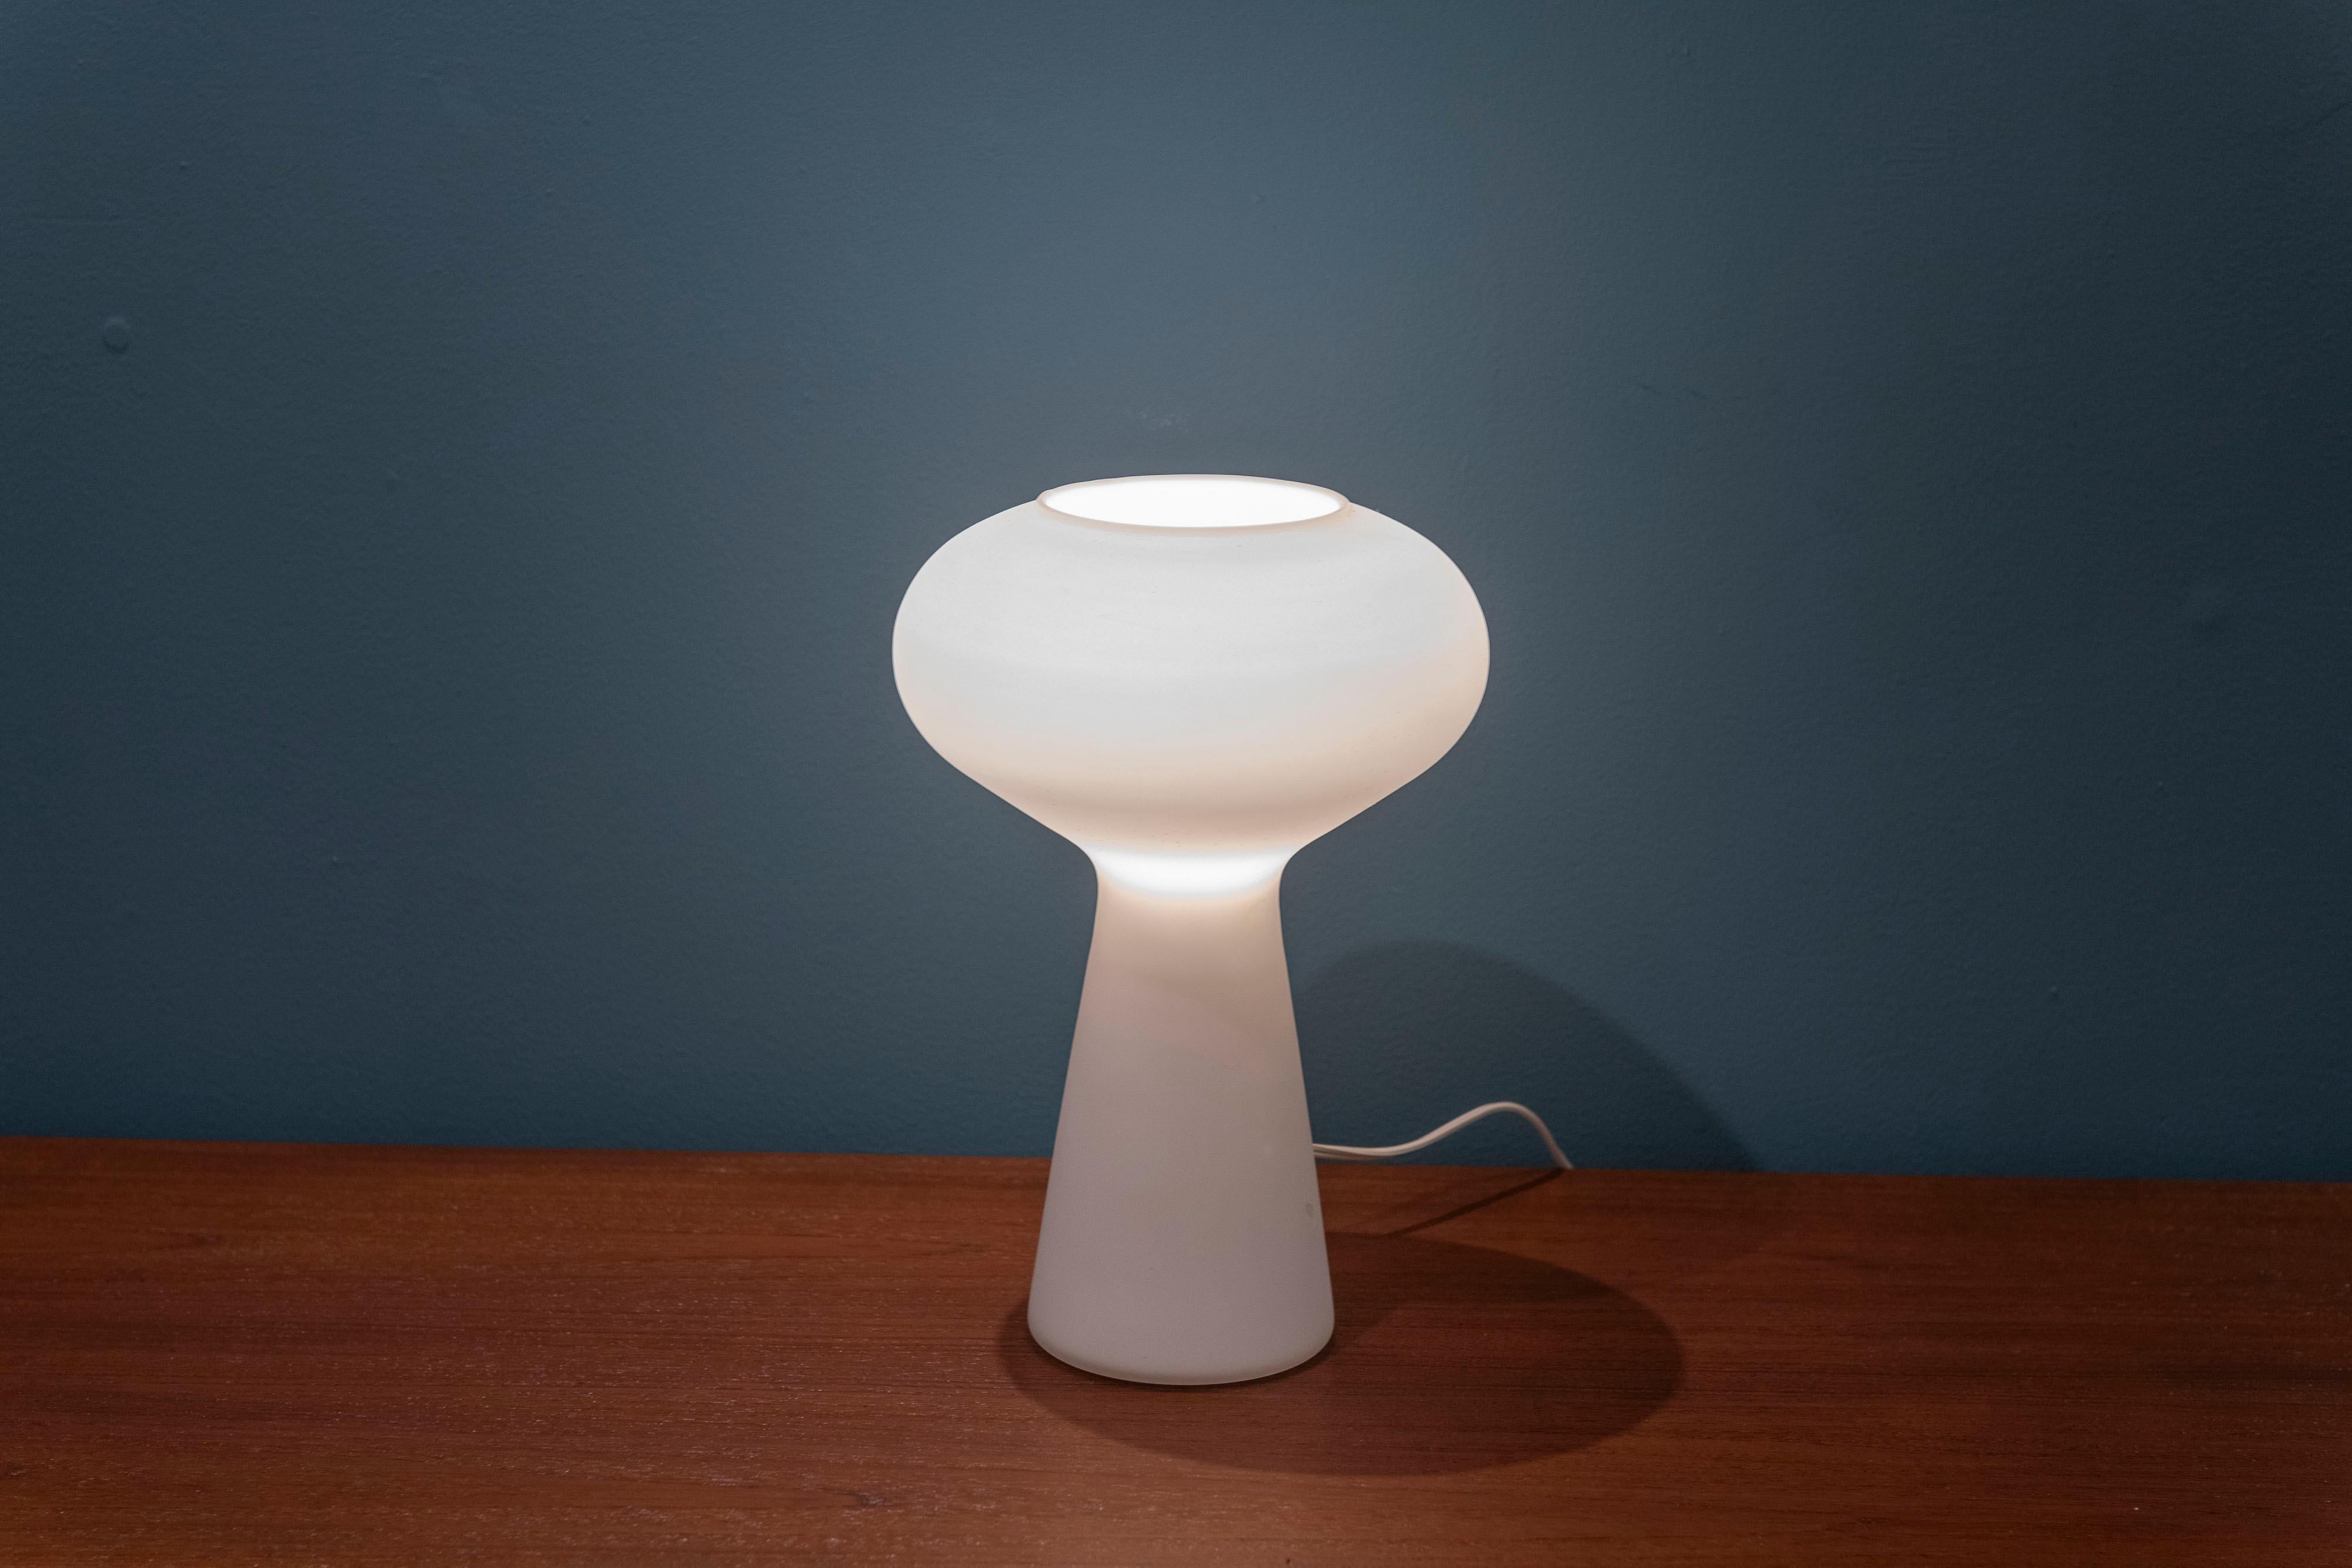 Lisa Johansson-Papa design table lamp, Sweden. Organic shaped body in opaque glass that emits a soft filtered light perfect for a console table credenza night light. Ready to install and enjoy.